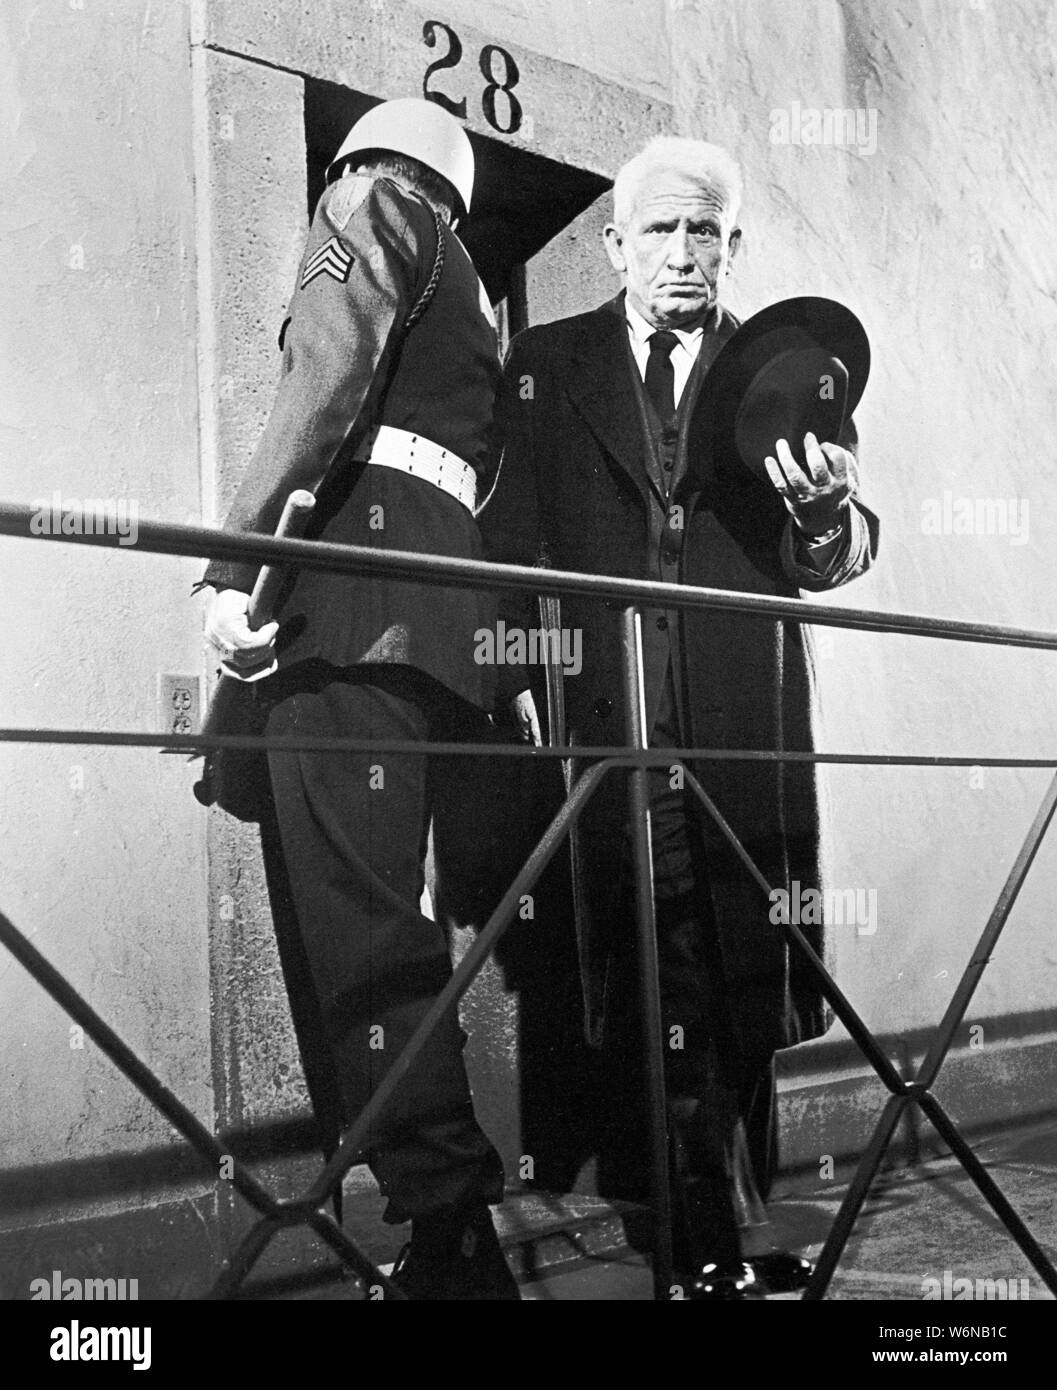 SPENCER TRACY in JUDGMENT AT NUREMBERG (1961), directed by STANLEY KRAMER. Credit: UNITED ARTISTS / Album Stock Photo